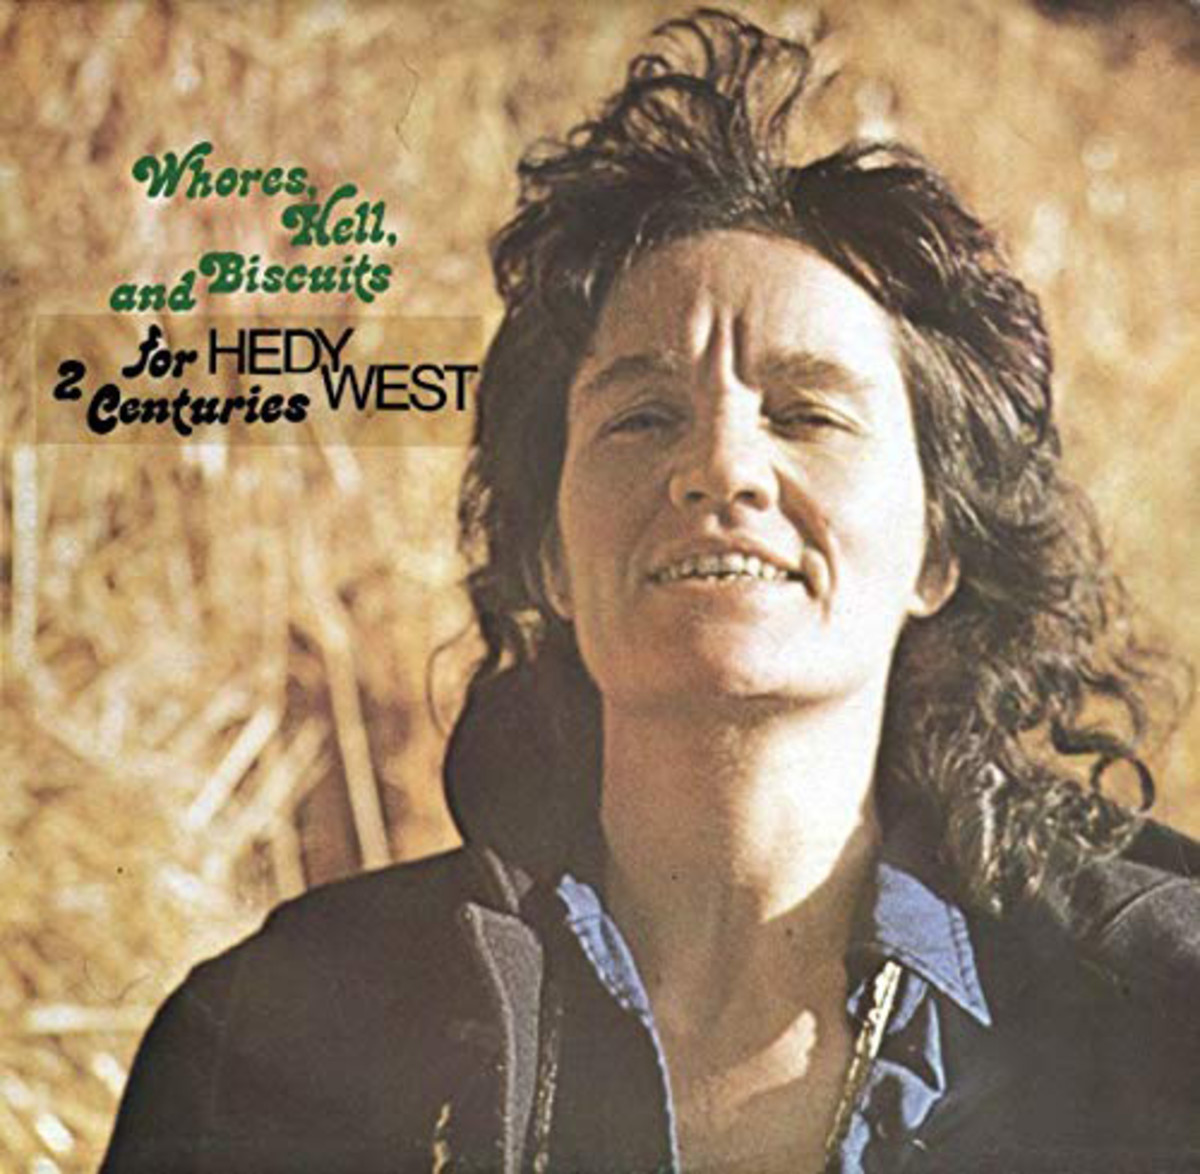 Hedy West – Whores, Hell and Biscuits